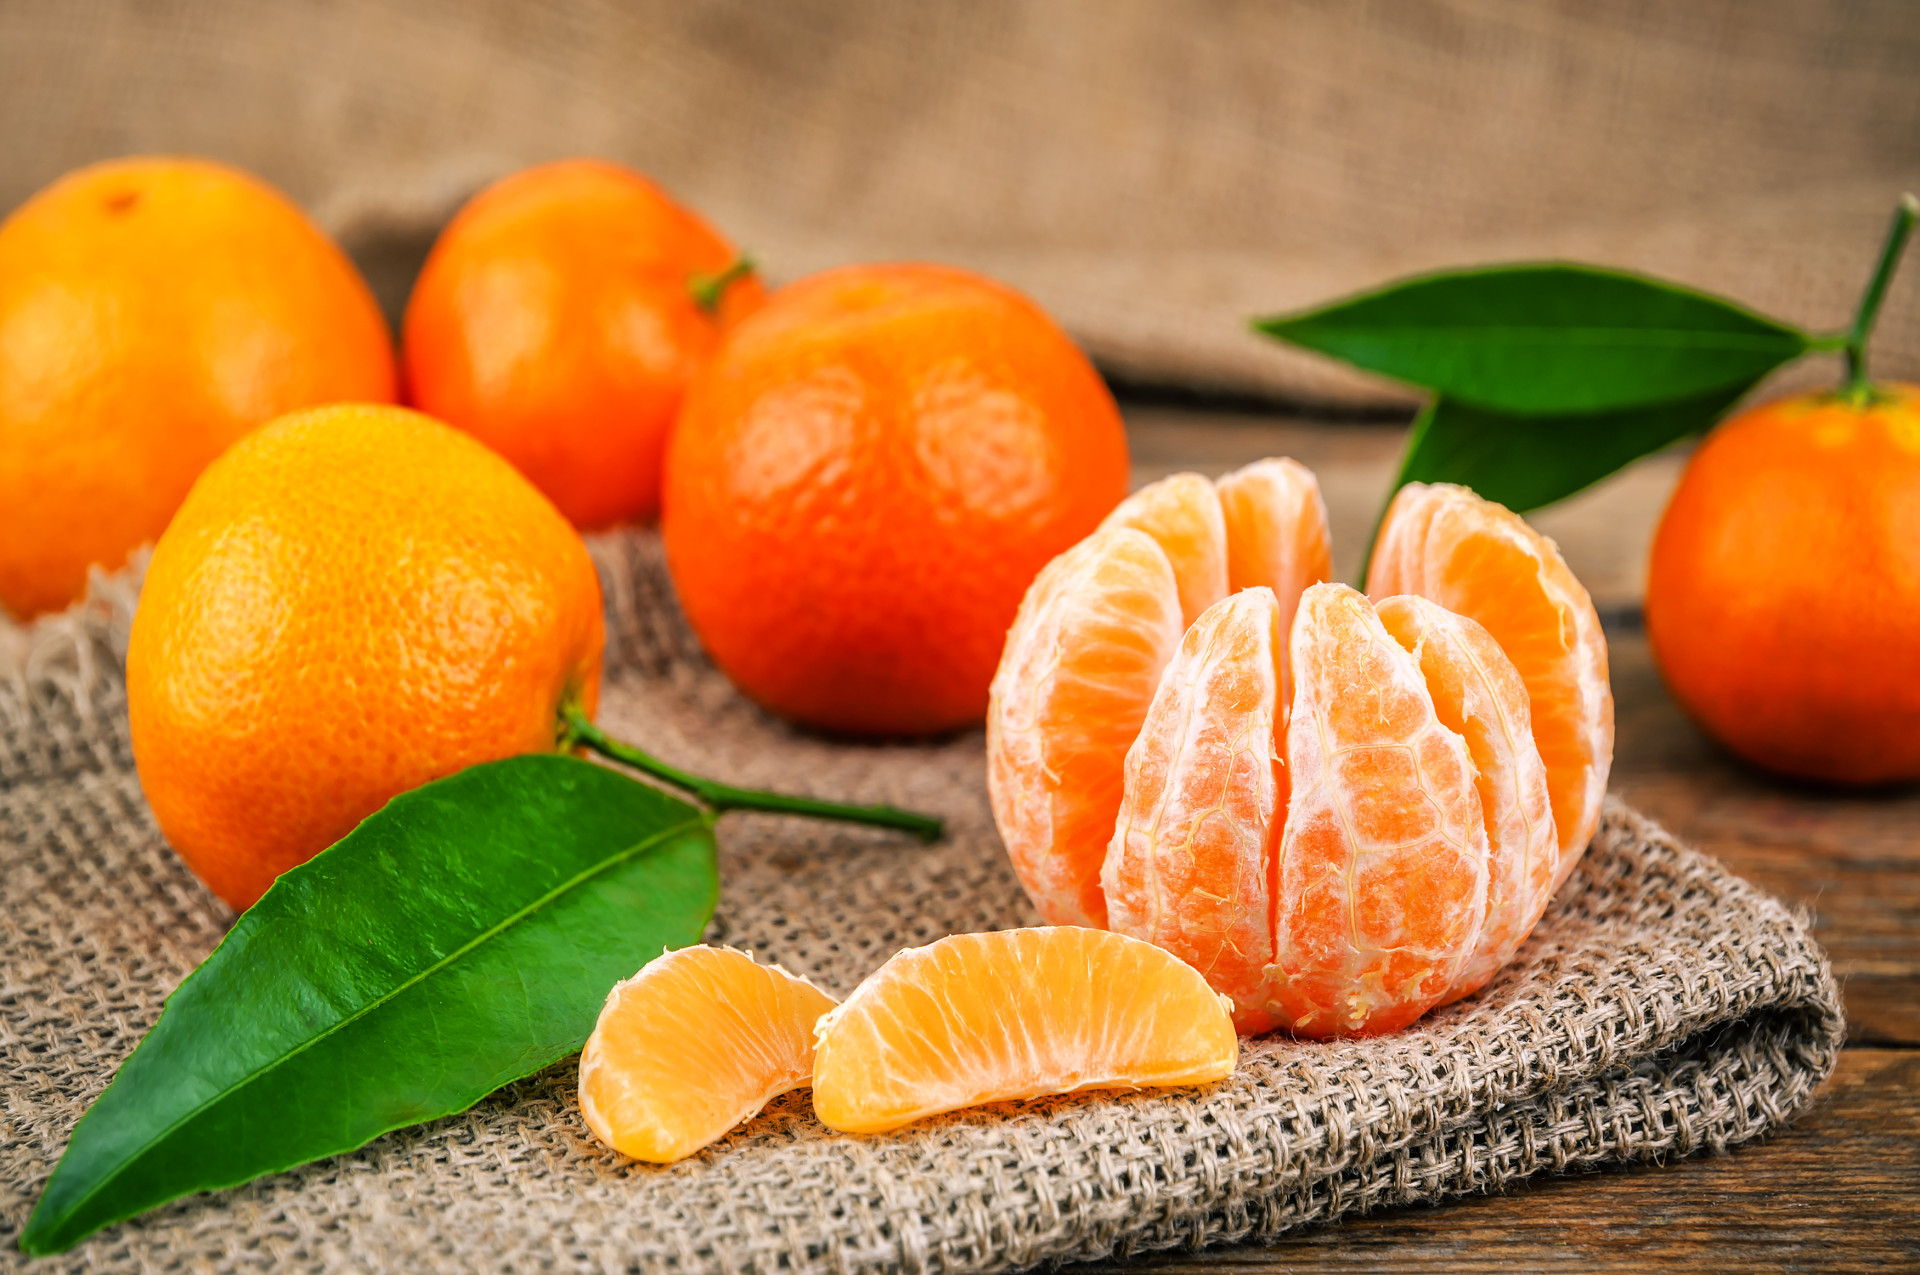 Seedless and easy to peel, mandarins are a simple grab-and-go option that will provide you with natural energy and vitamin C.<p><a href="https://www.msn.com/en-us/community/channel/vid-7xx8mnucu55yw63we9va2gwr7uihbxwc68fxqp25x6tg4ftibpra?cvid=94631541bc0f4f89bfd59158d696ad7e">Follow us and access great exclusive content every day</a></p>